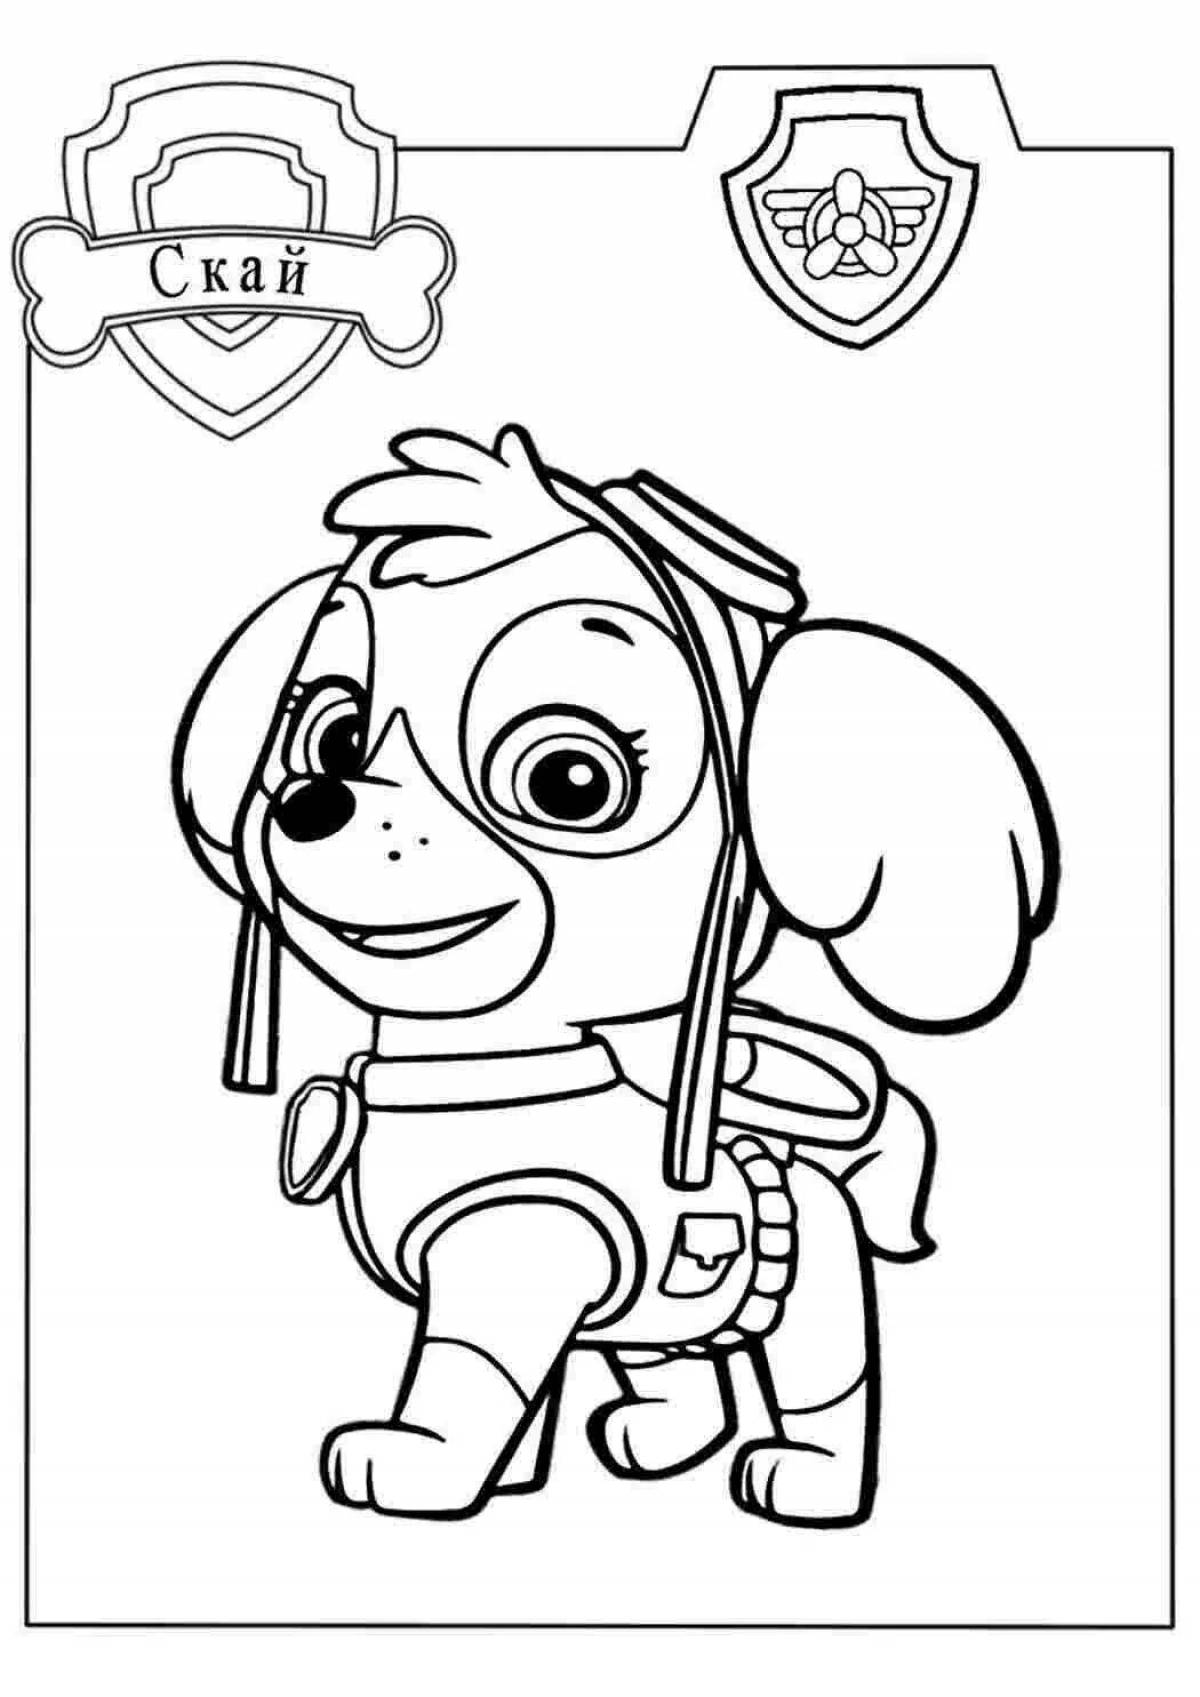 Quirky skye girls coloring book